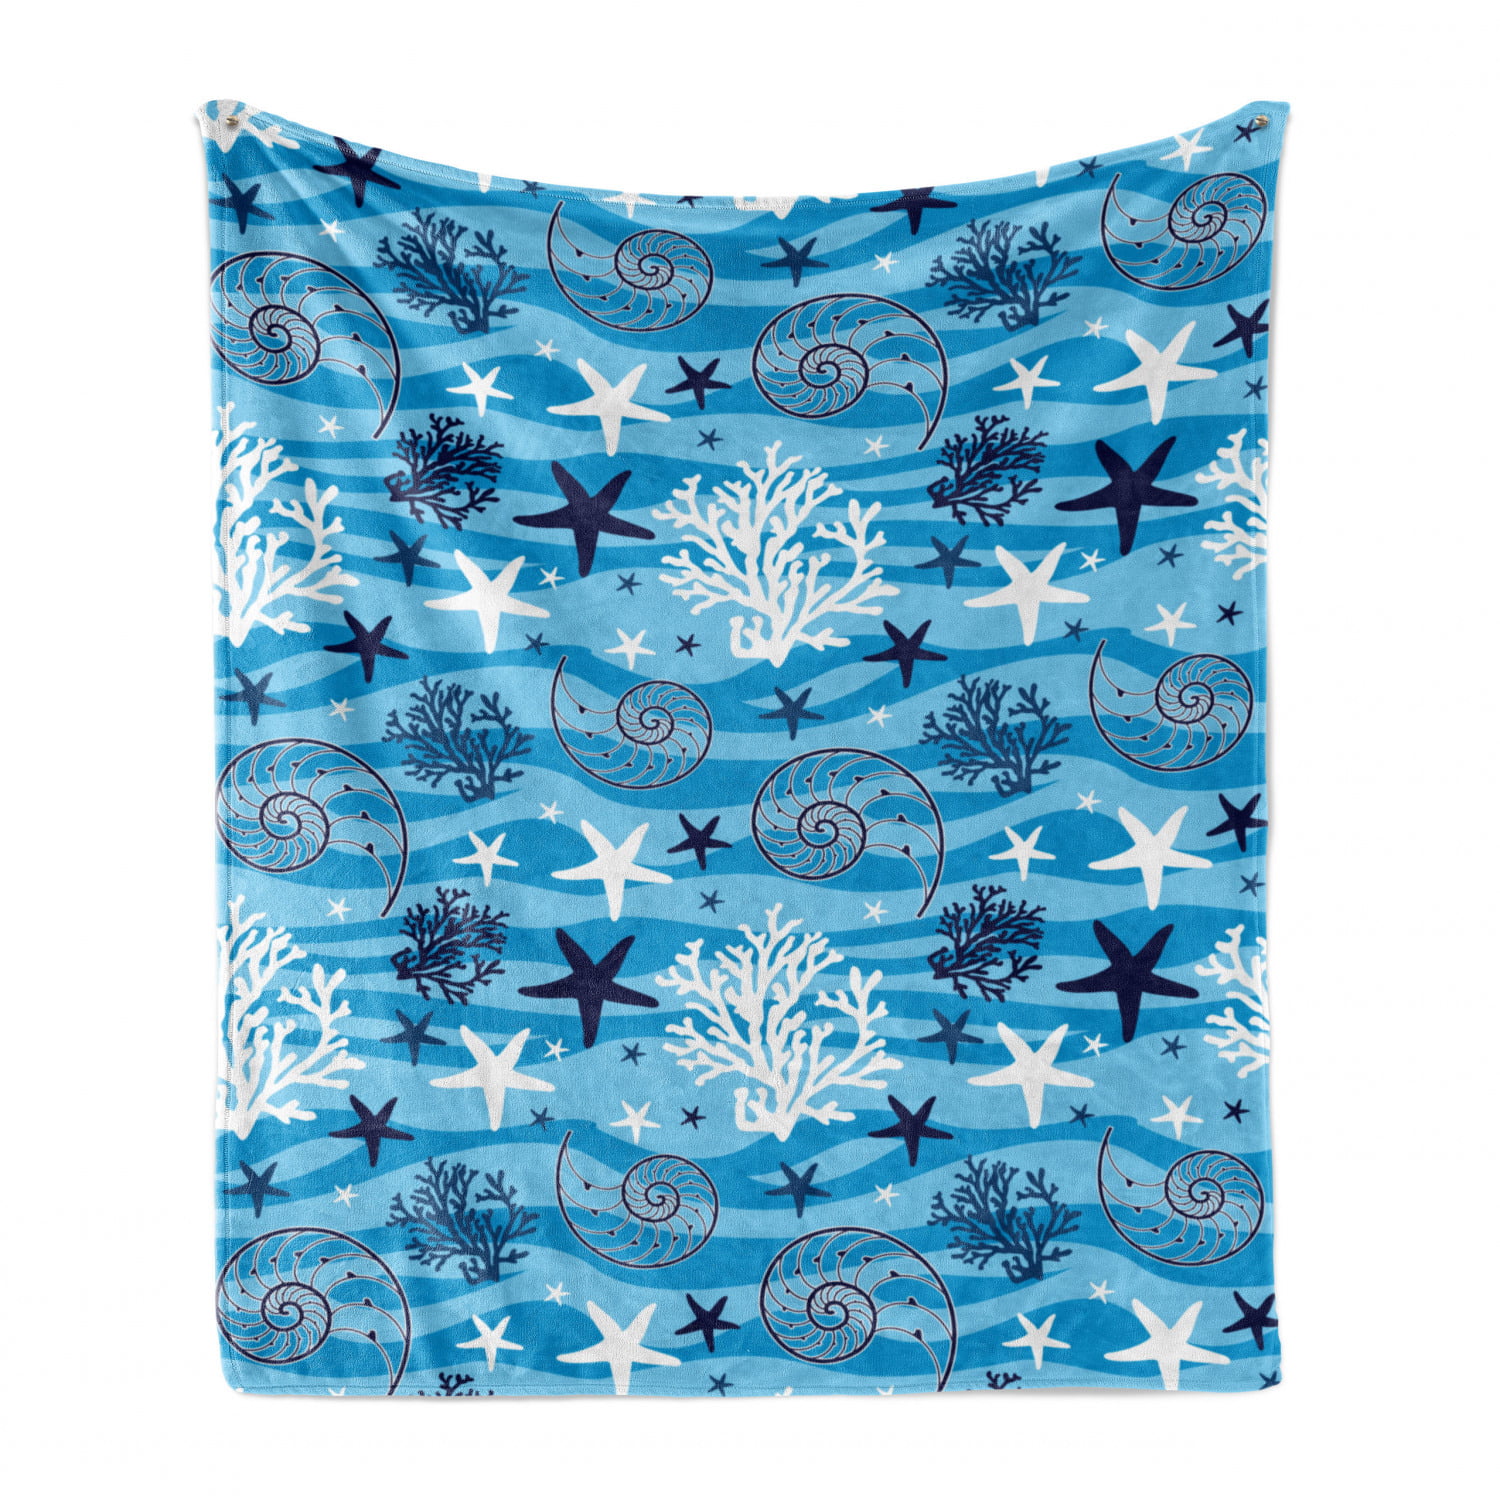 Blue White Ambesonne Seashells Soft Flannel Fleece Throw Blanket Cozy Plush for Indoor and Outdoor Use 50 x 70 Nautical Underwater Universe Design of All Creatures Scallop Motif Illustration 